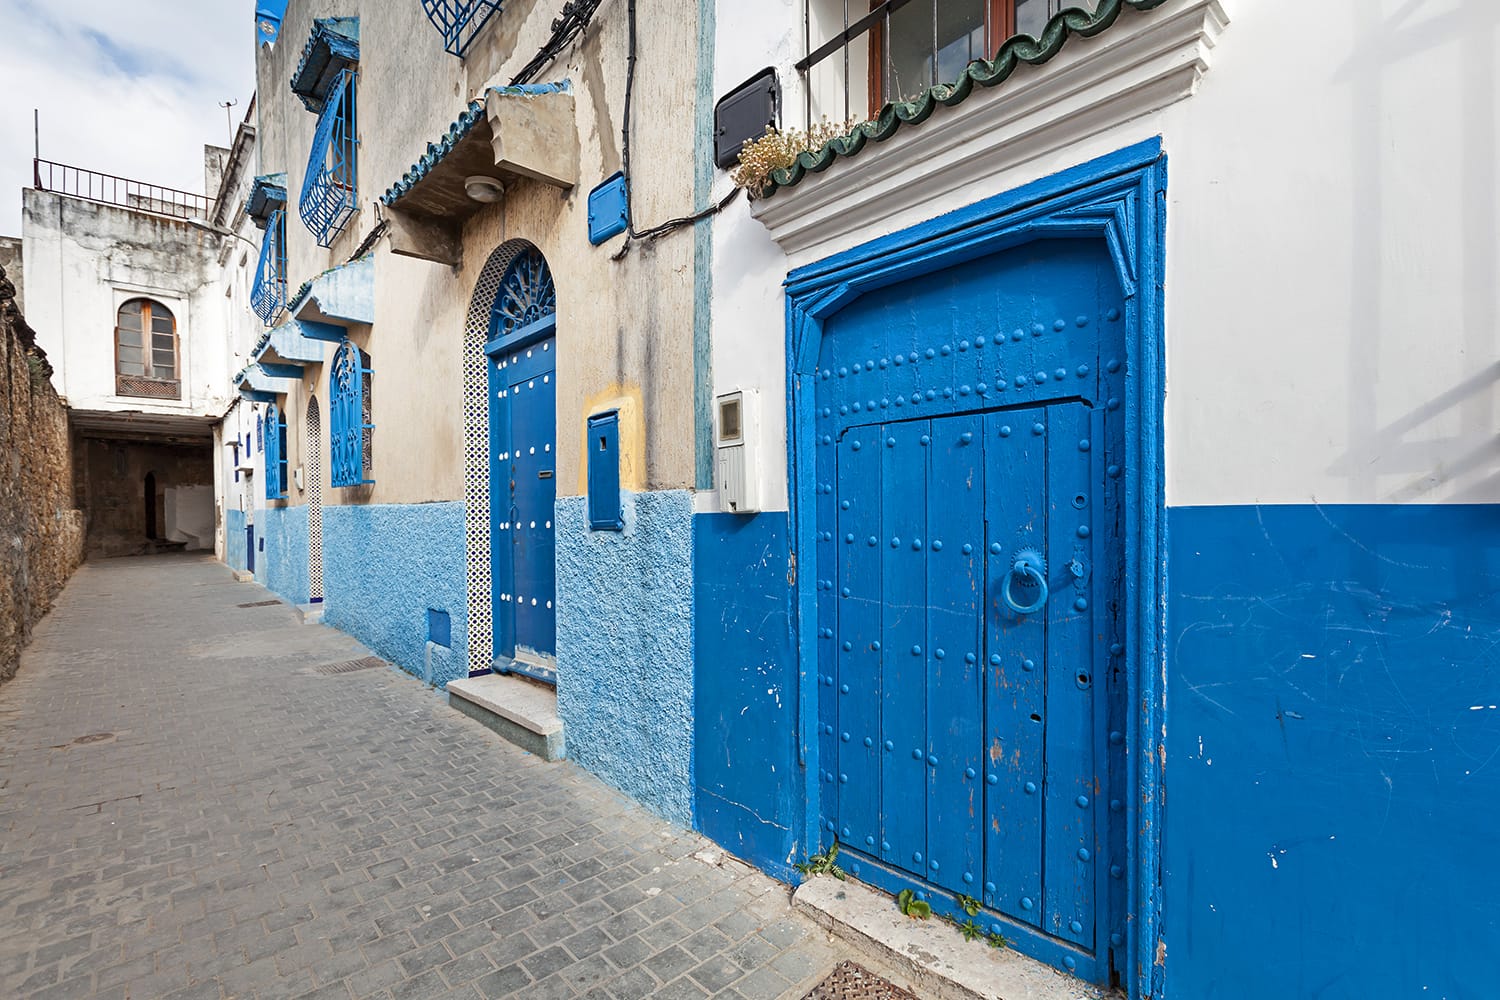 Streets of old Medina. Historical central part of Tanger city, Morocco